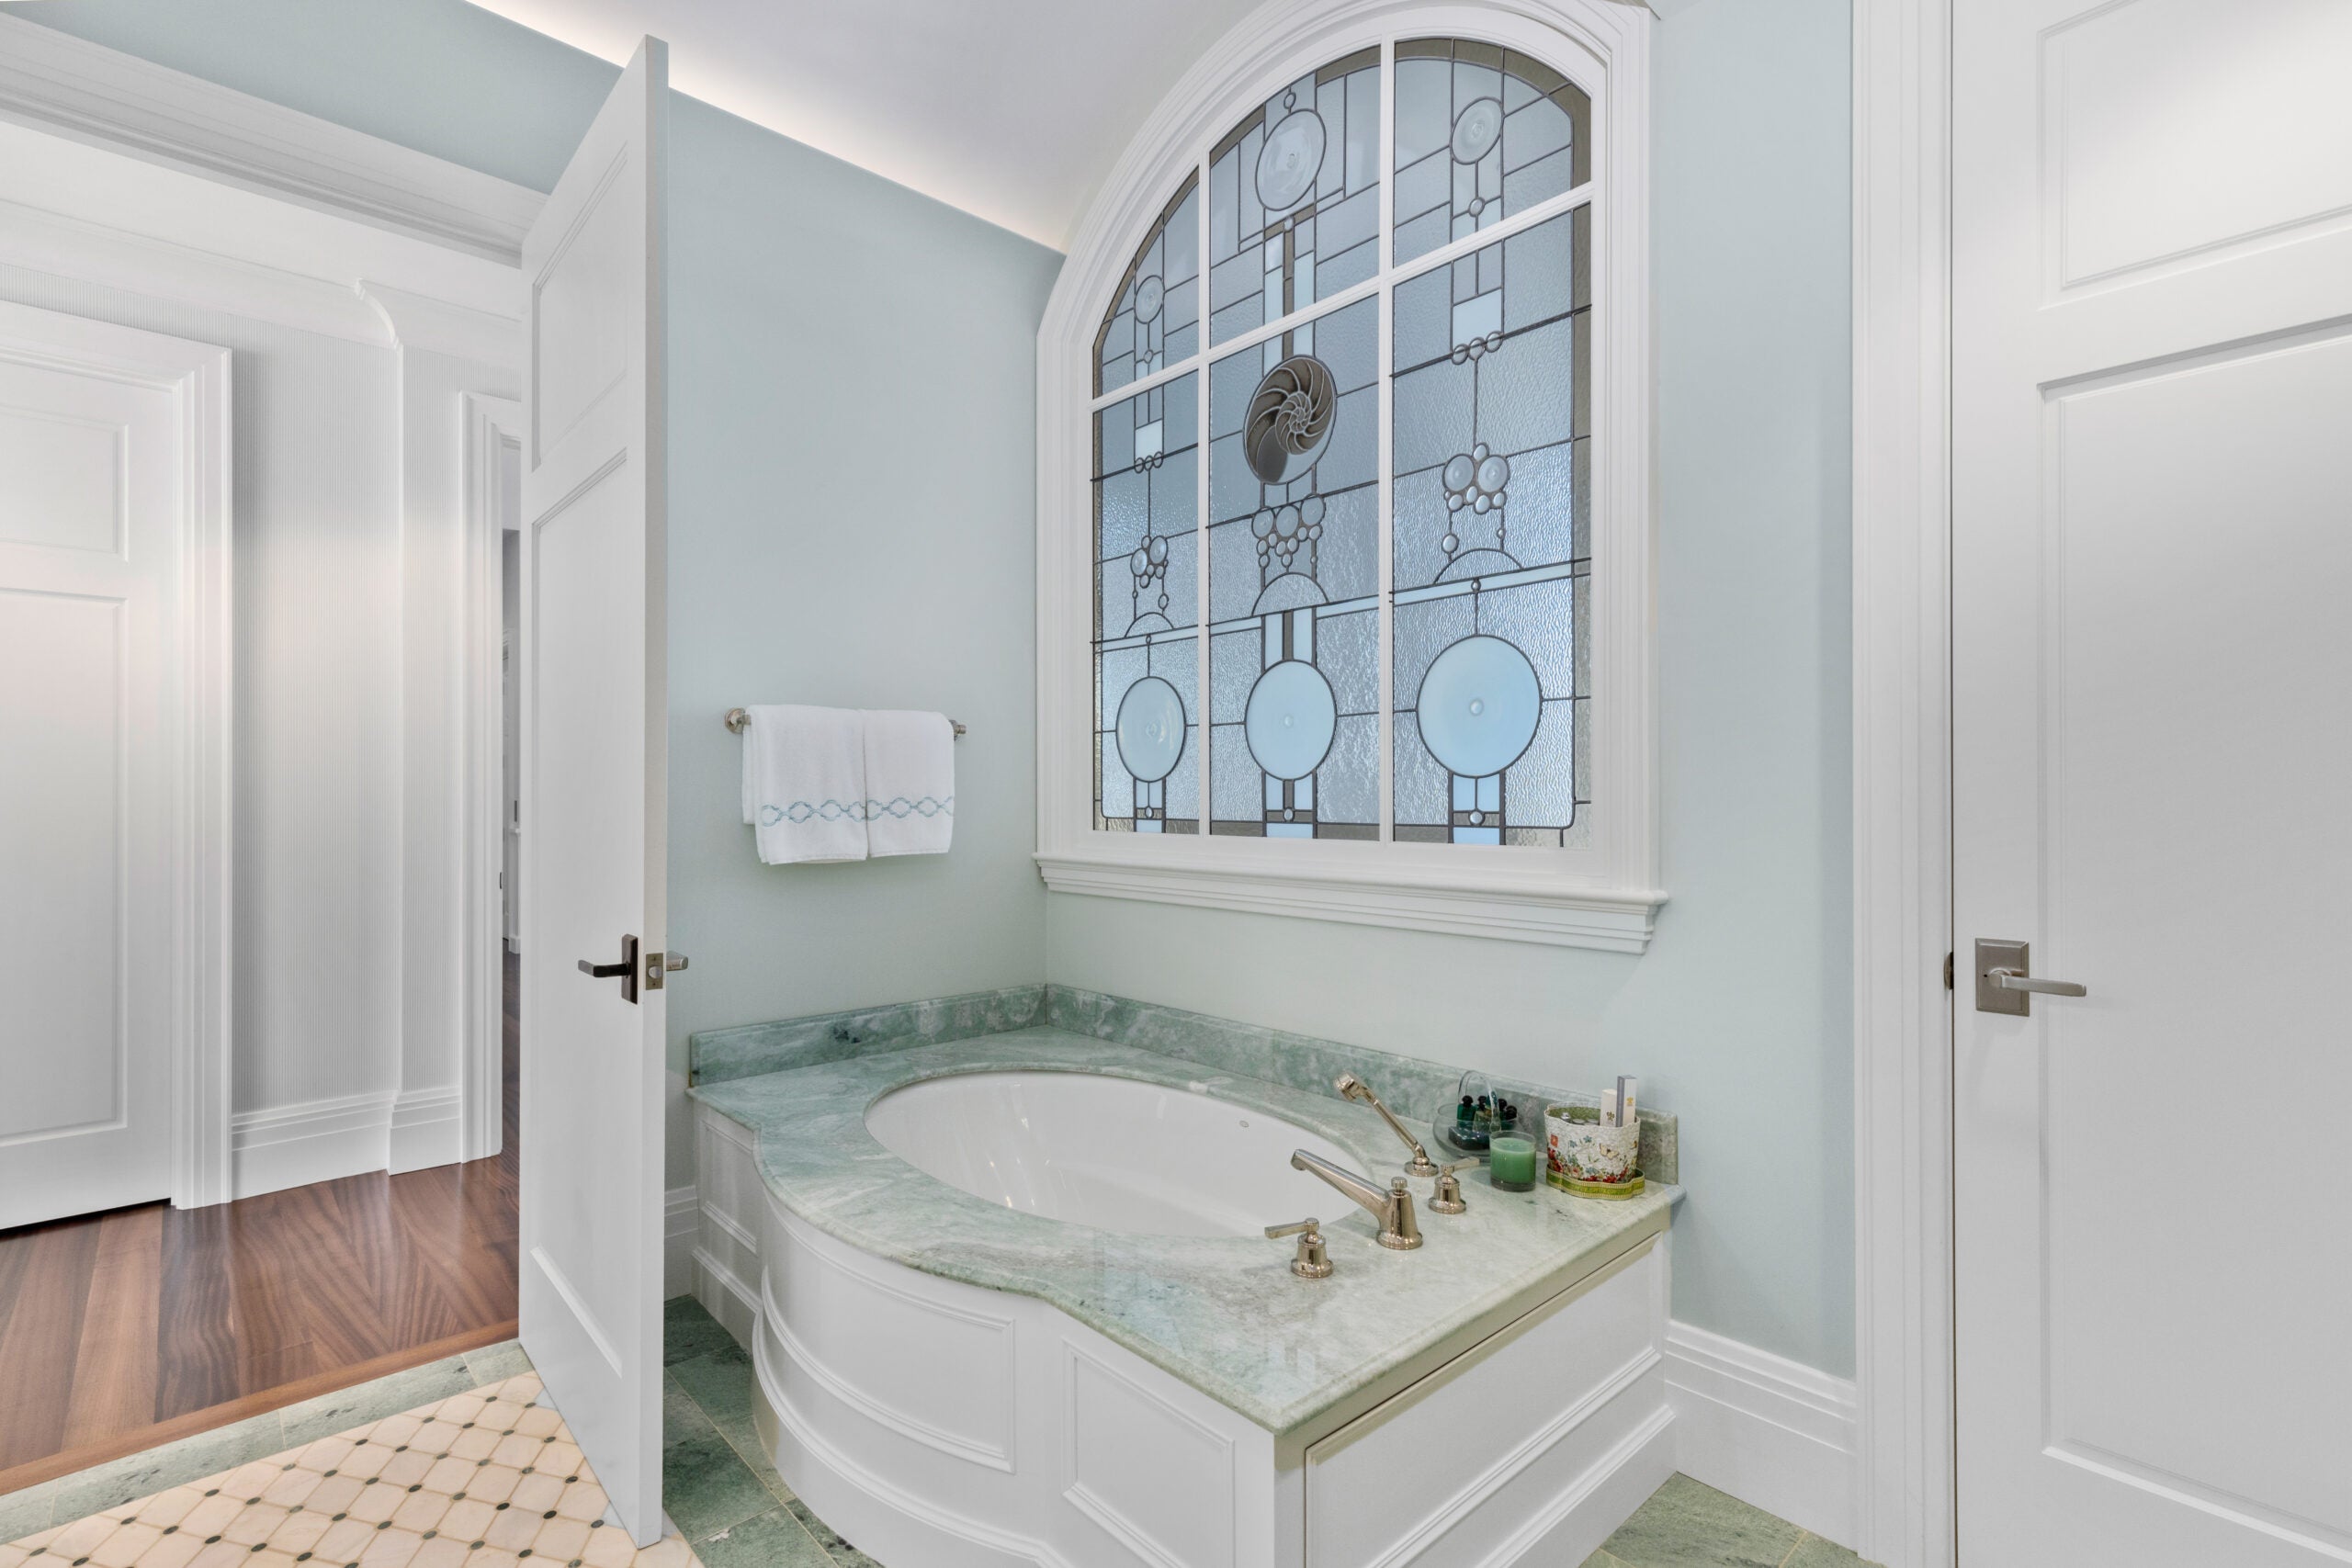 A door is open to a bathroom with a green marble tub and floor. The tub, which has gold fixtures, is oval and set before a stained-glass window depicting bubbles and a seashell.